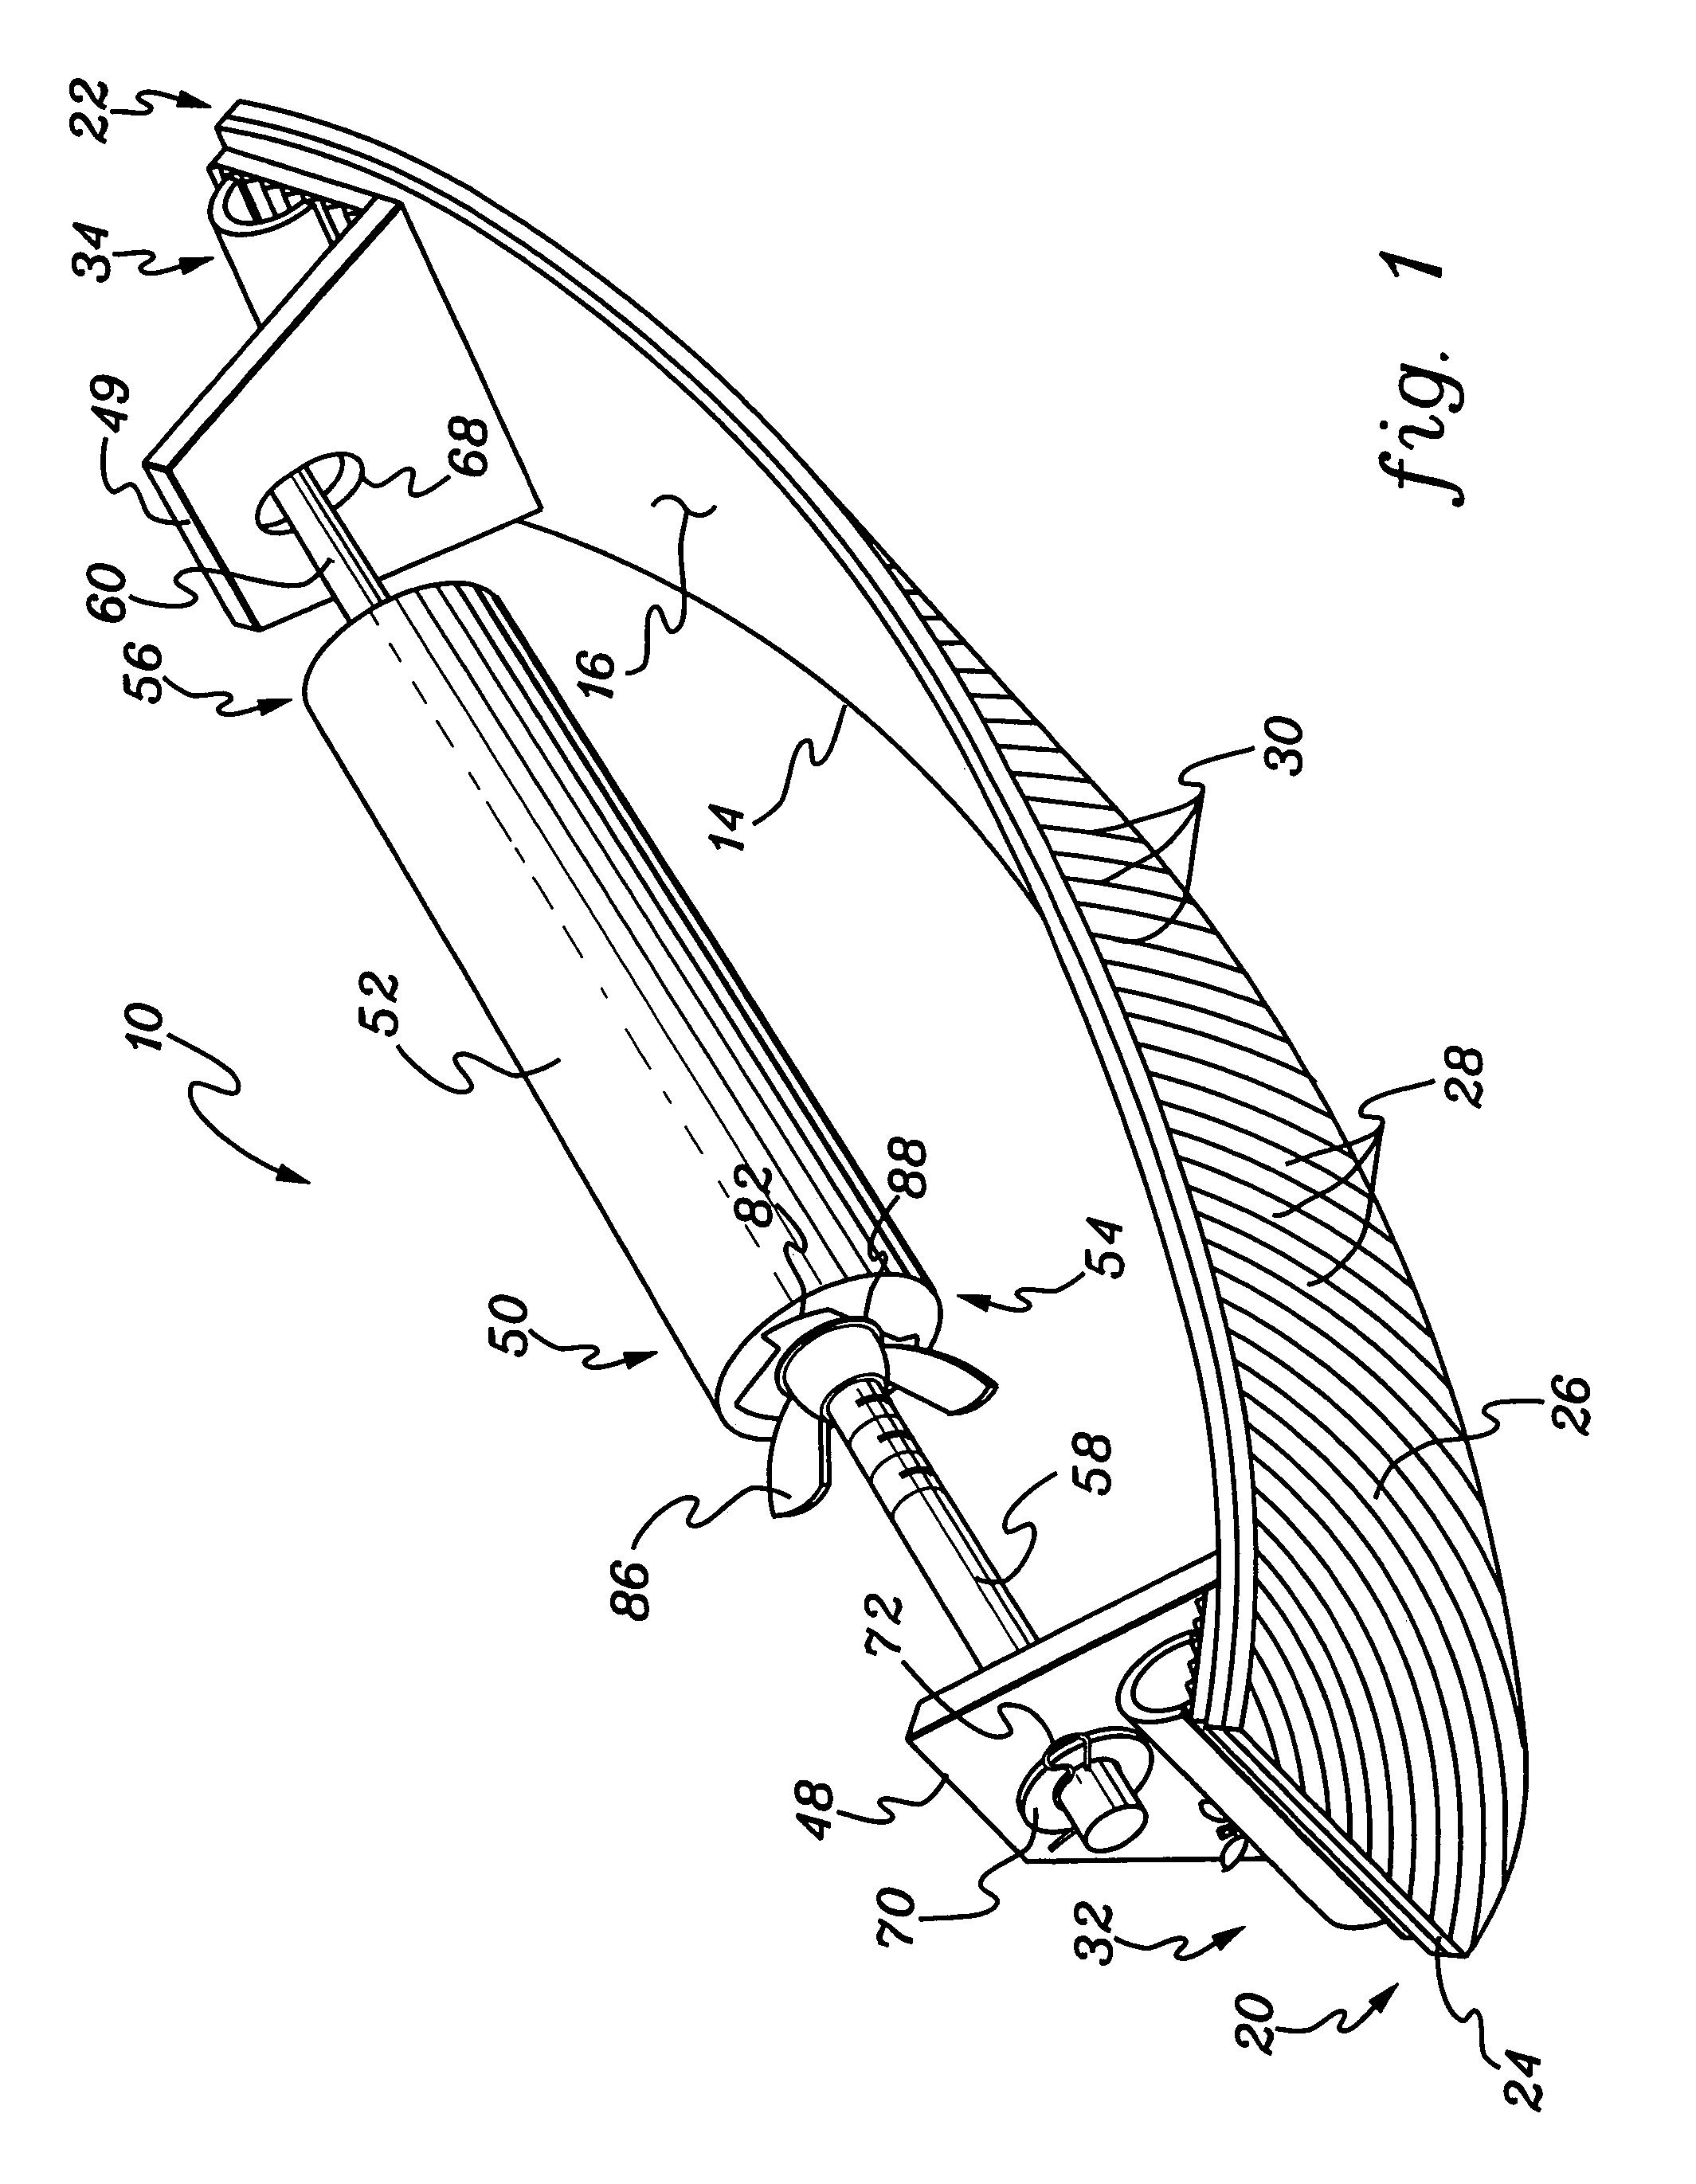 Tool having an adjustable curved working surface and a method for using the tool